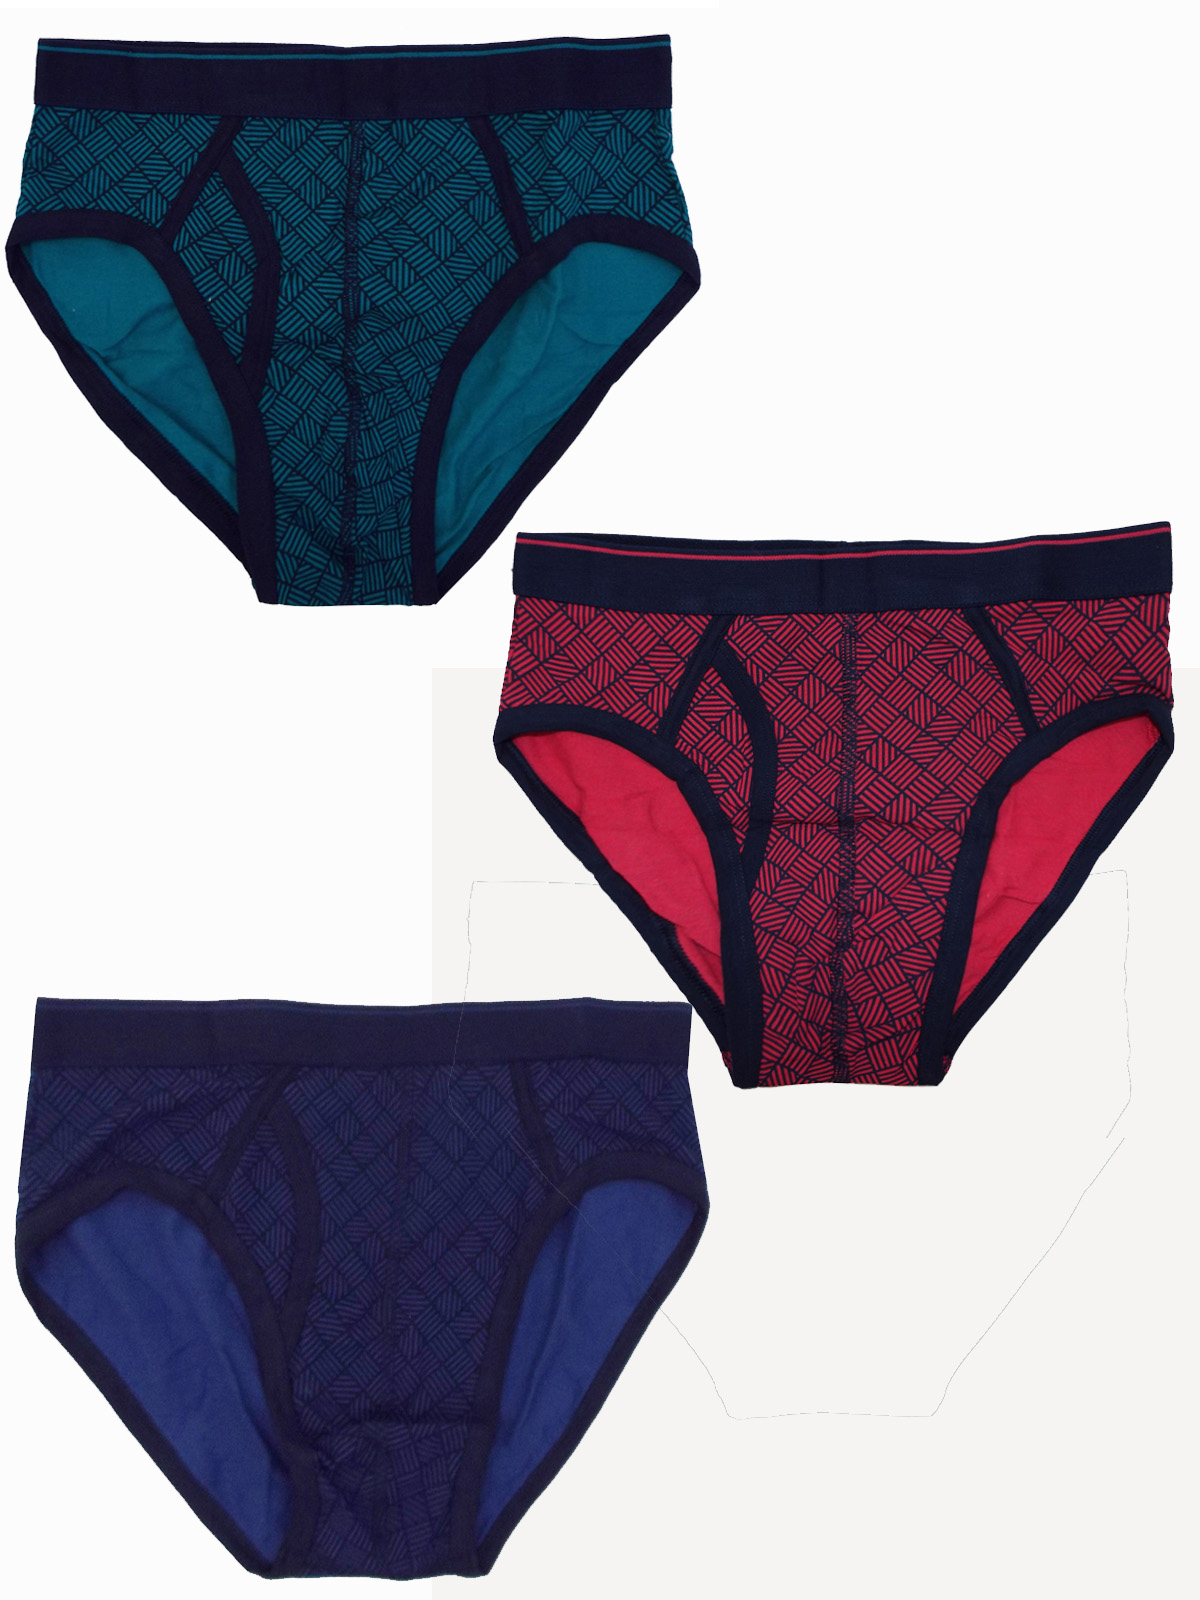 Marks and Spencer - - M&5 ASSORTED Mens Cotton Rich Printed Briefs ...